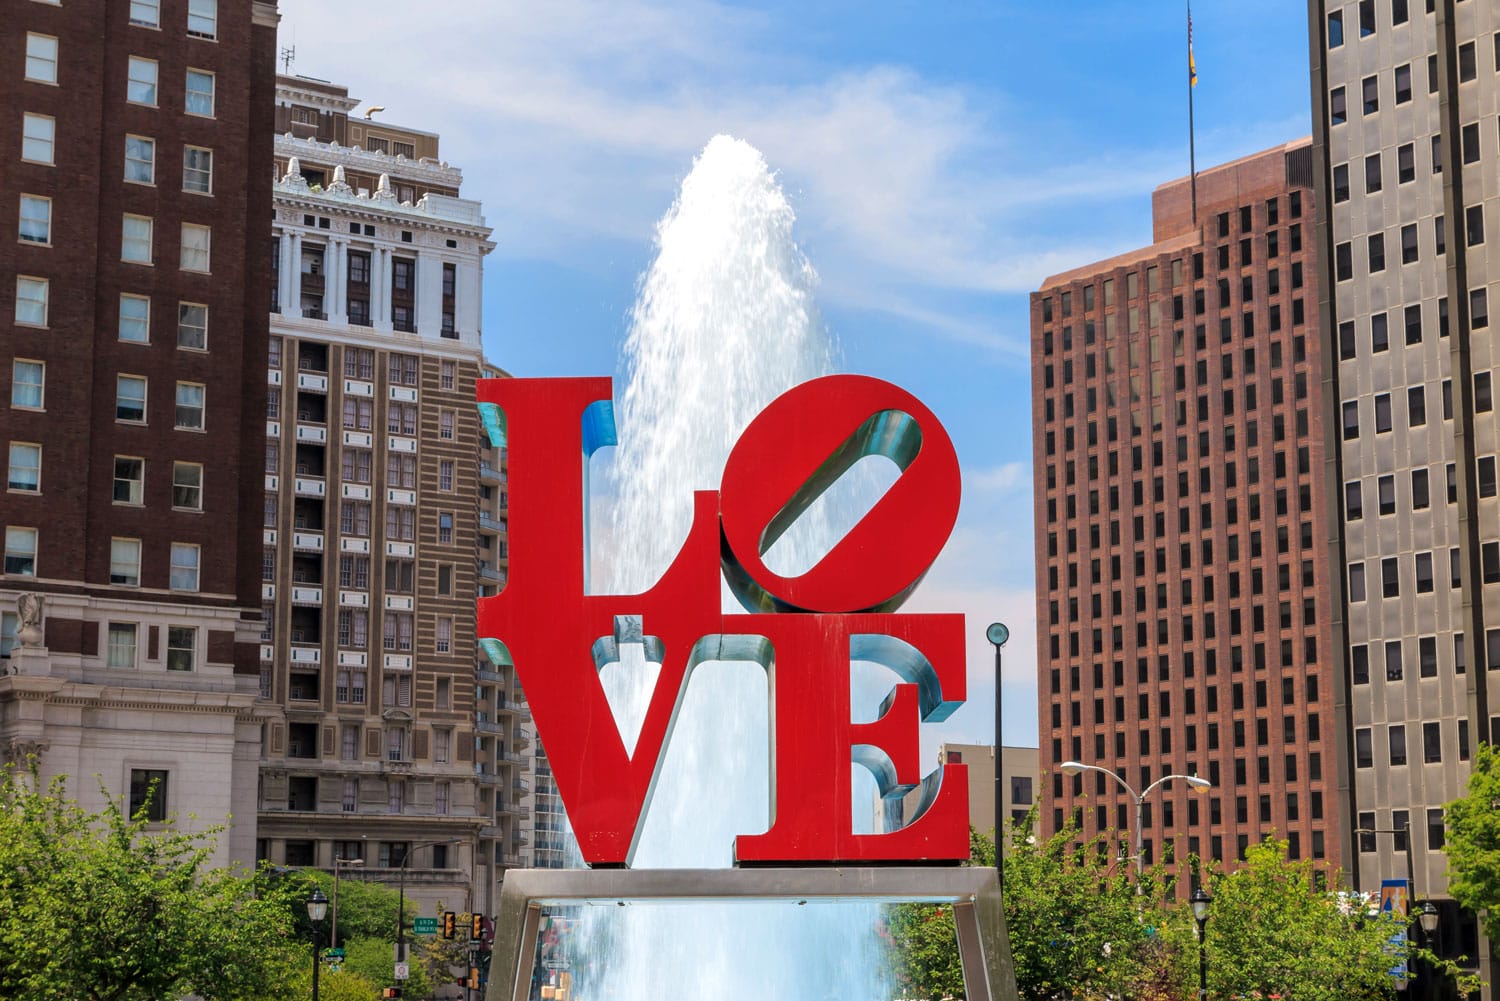 The popular Love Park named after the Love statue in Philadelphia, USA.